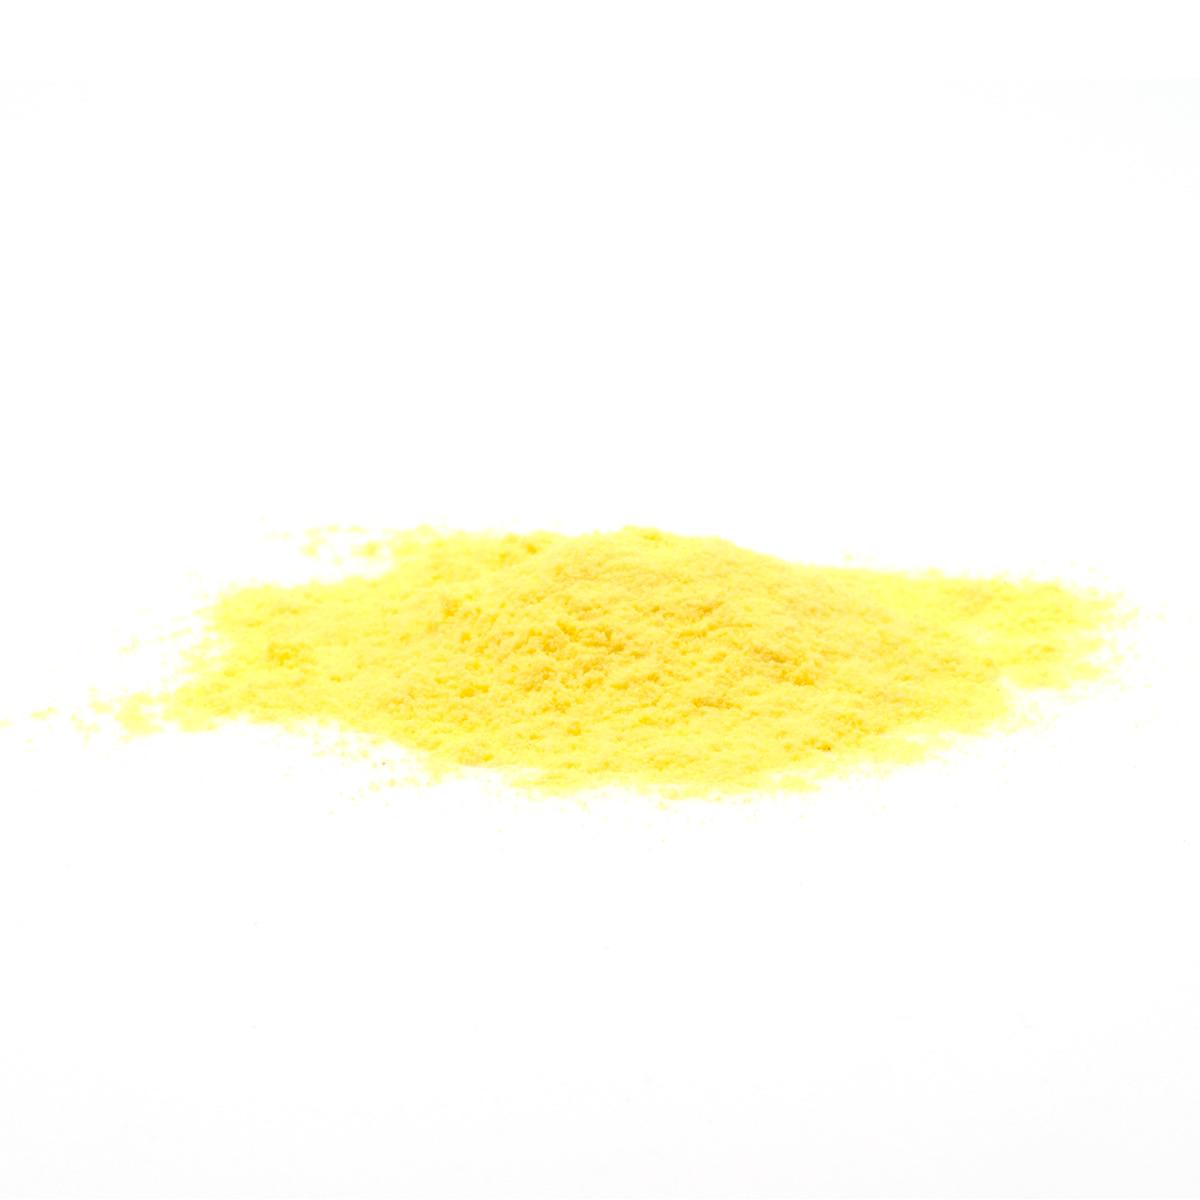 Maize Flour Zoomed